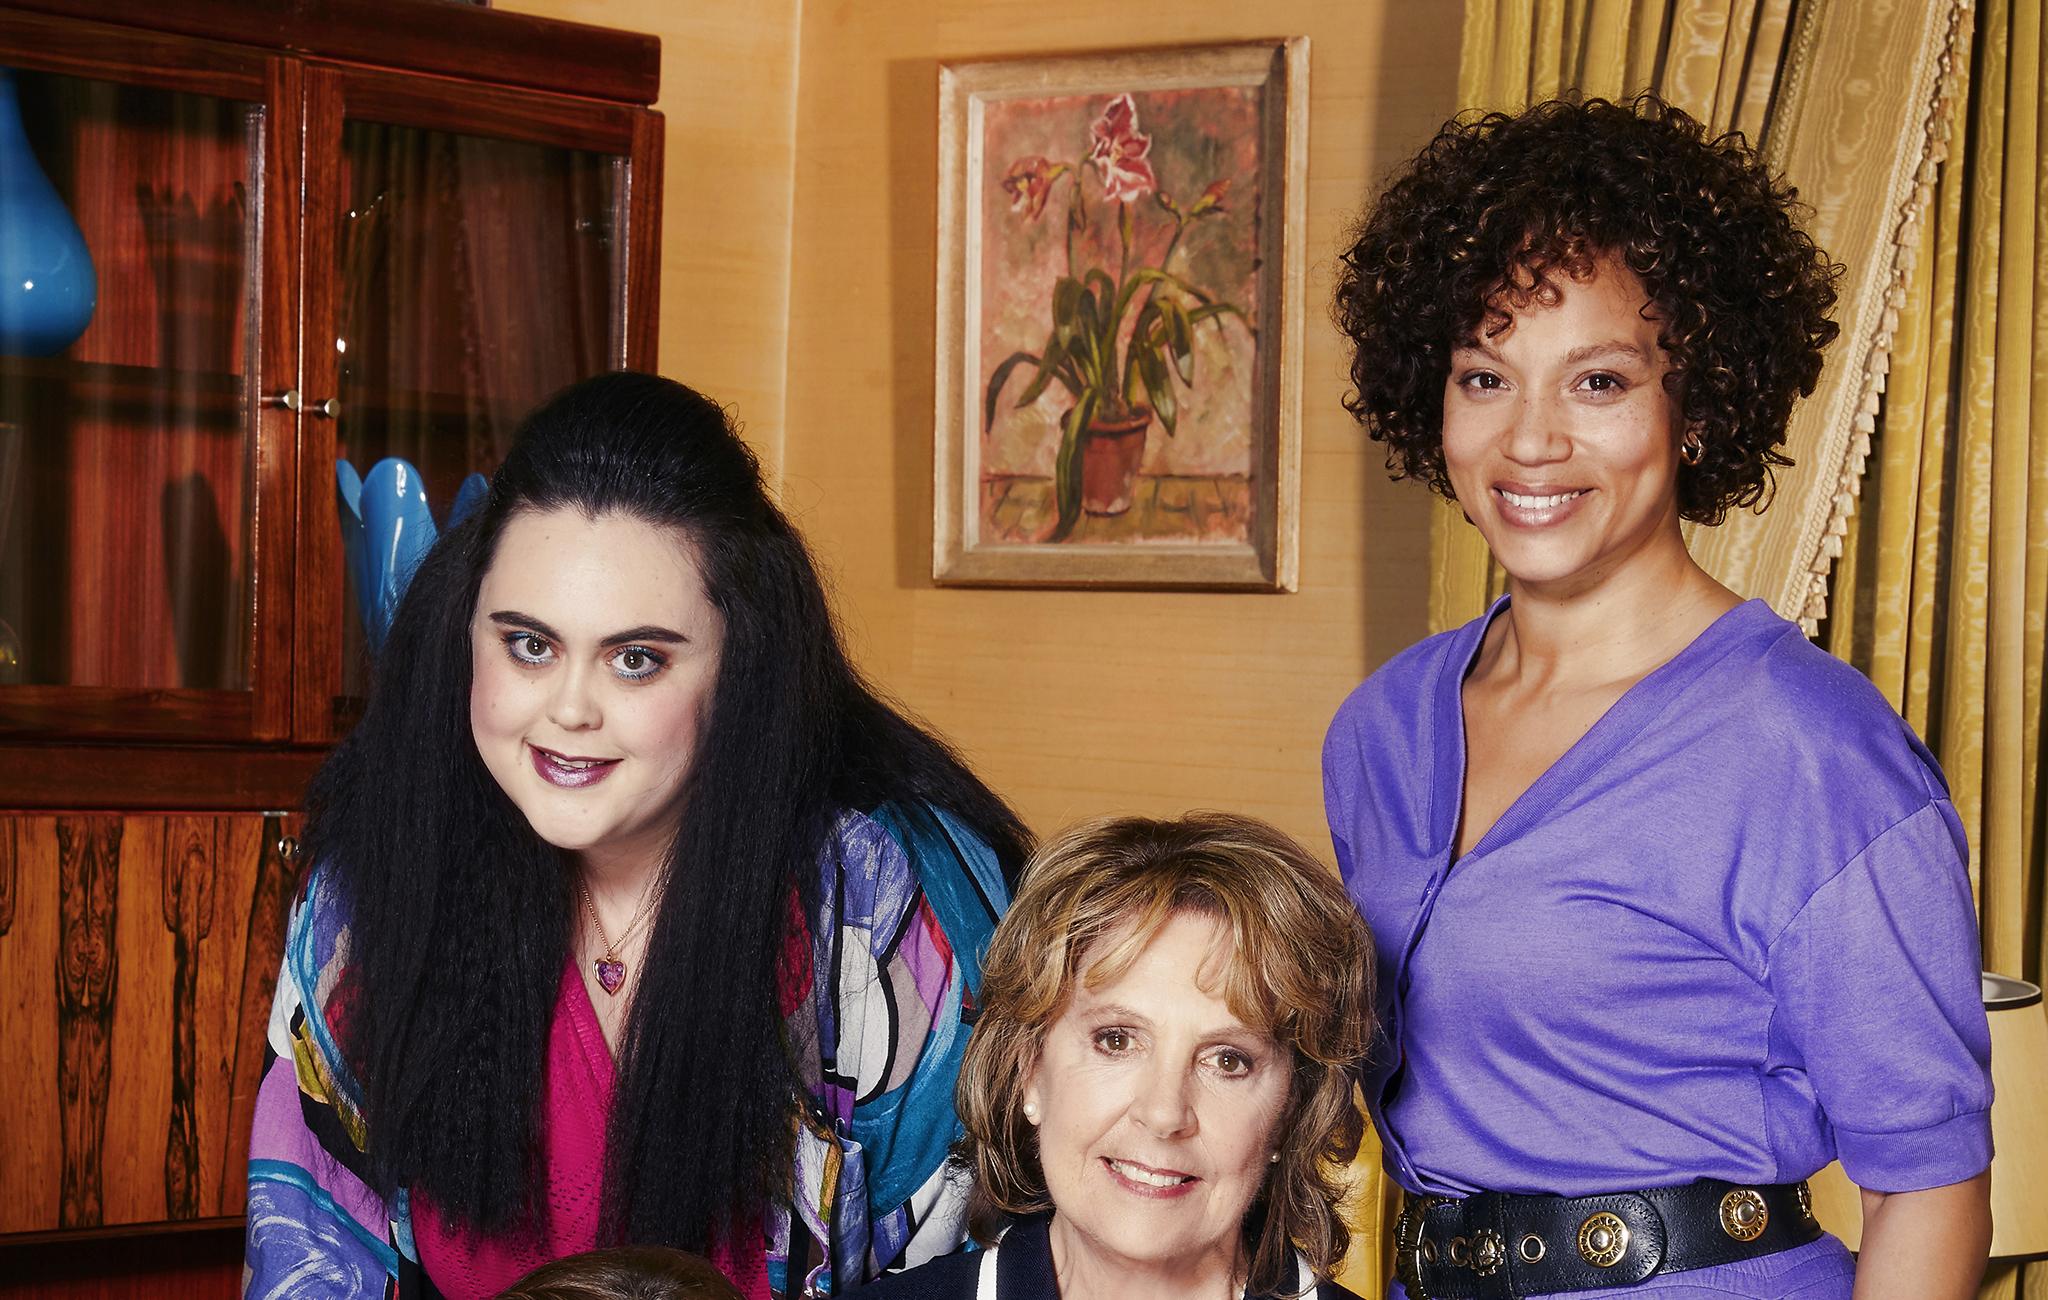 Penelope Wilton, Sophie Rundle, Angela Griffin and Sharon Rooney are to star as four women striving to find happiness and fulfilment in new ITV drama Brief Encounters